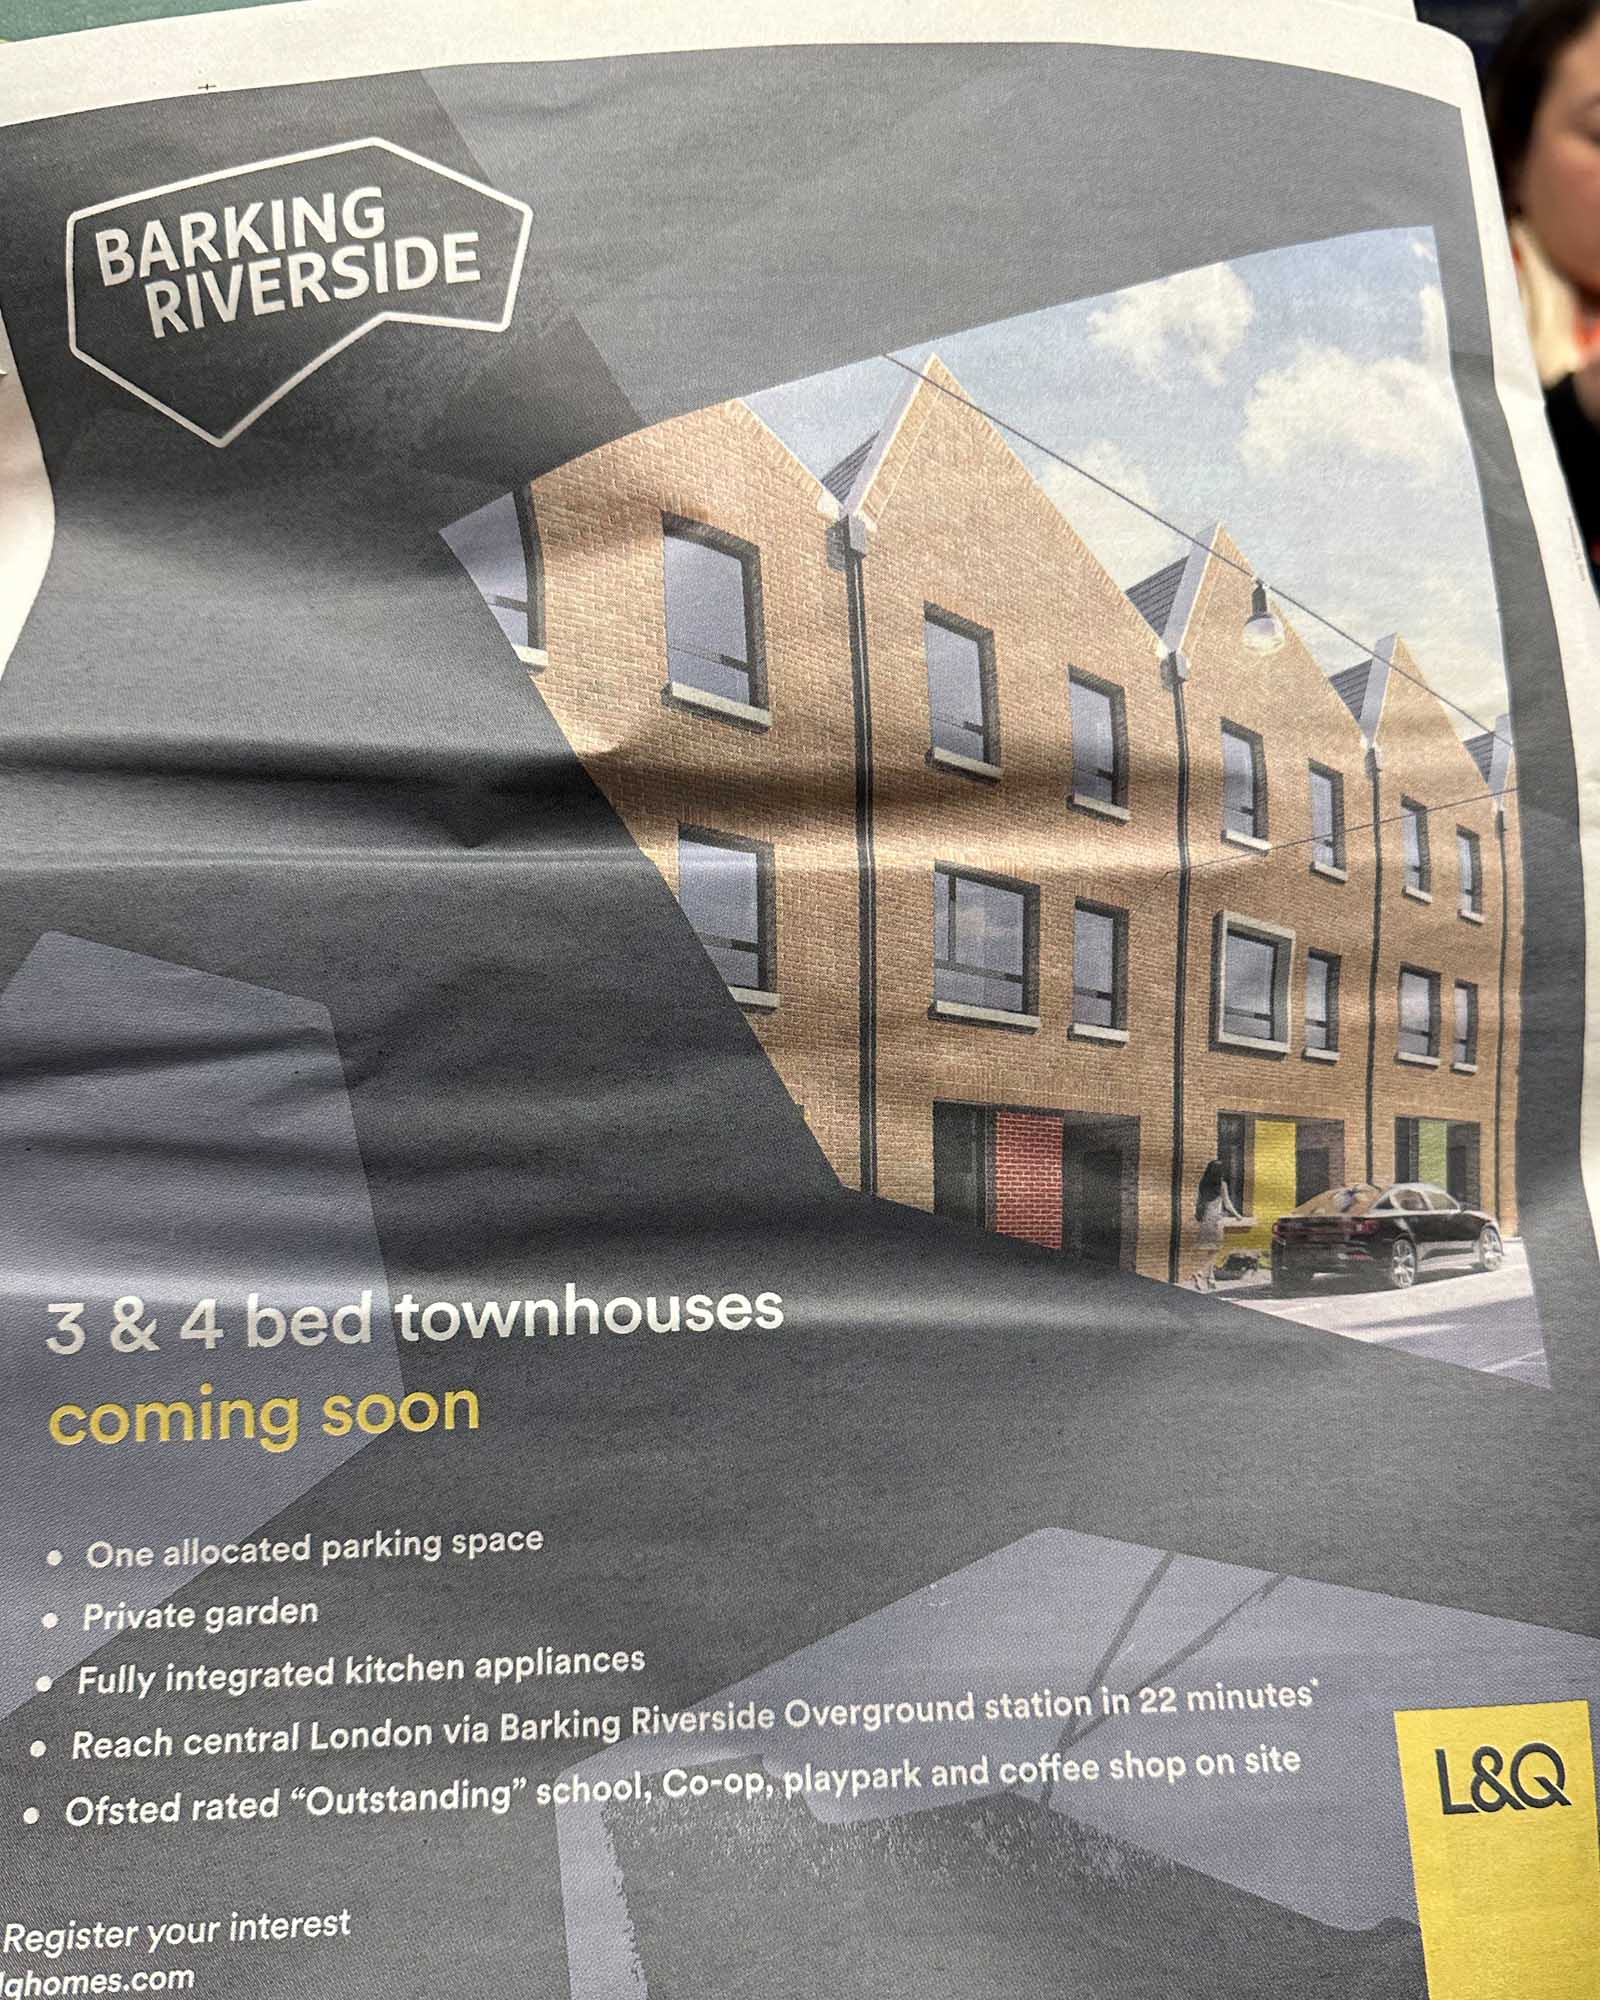 Townhouses coming soon to Barking Riverside